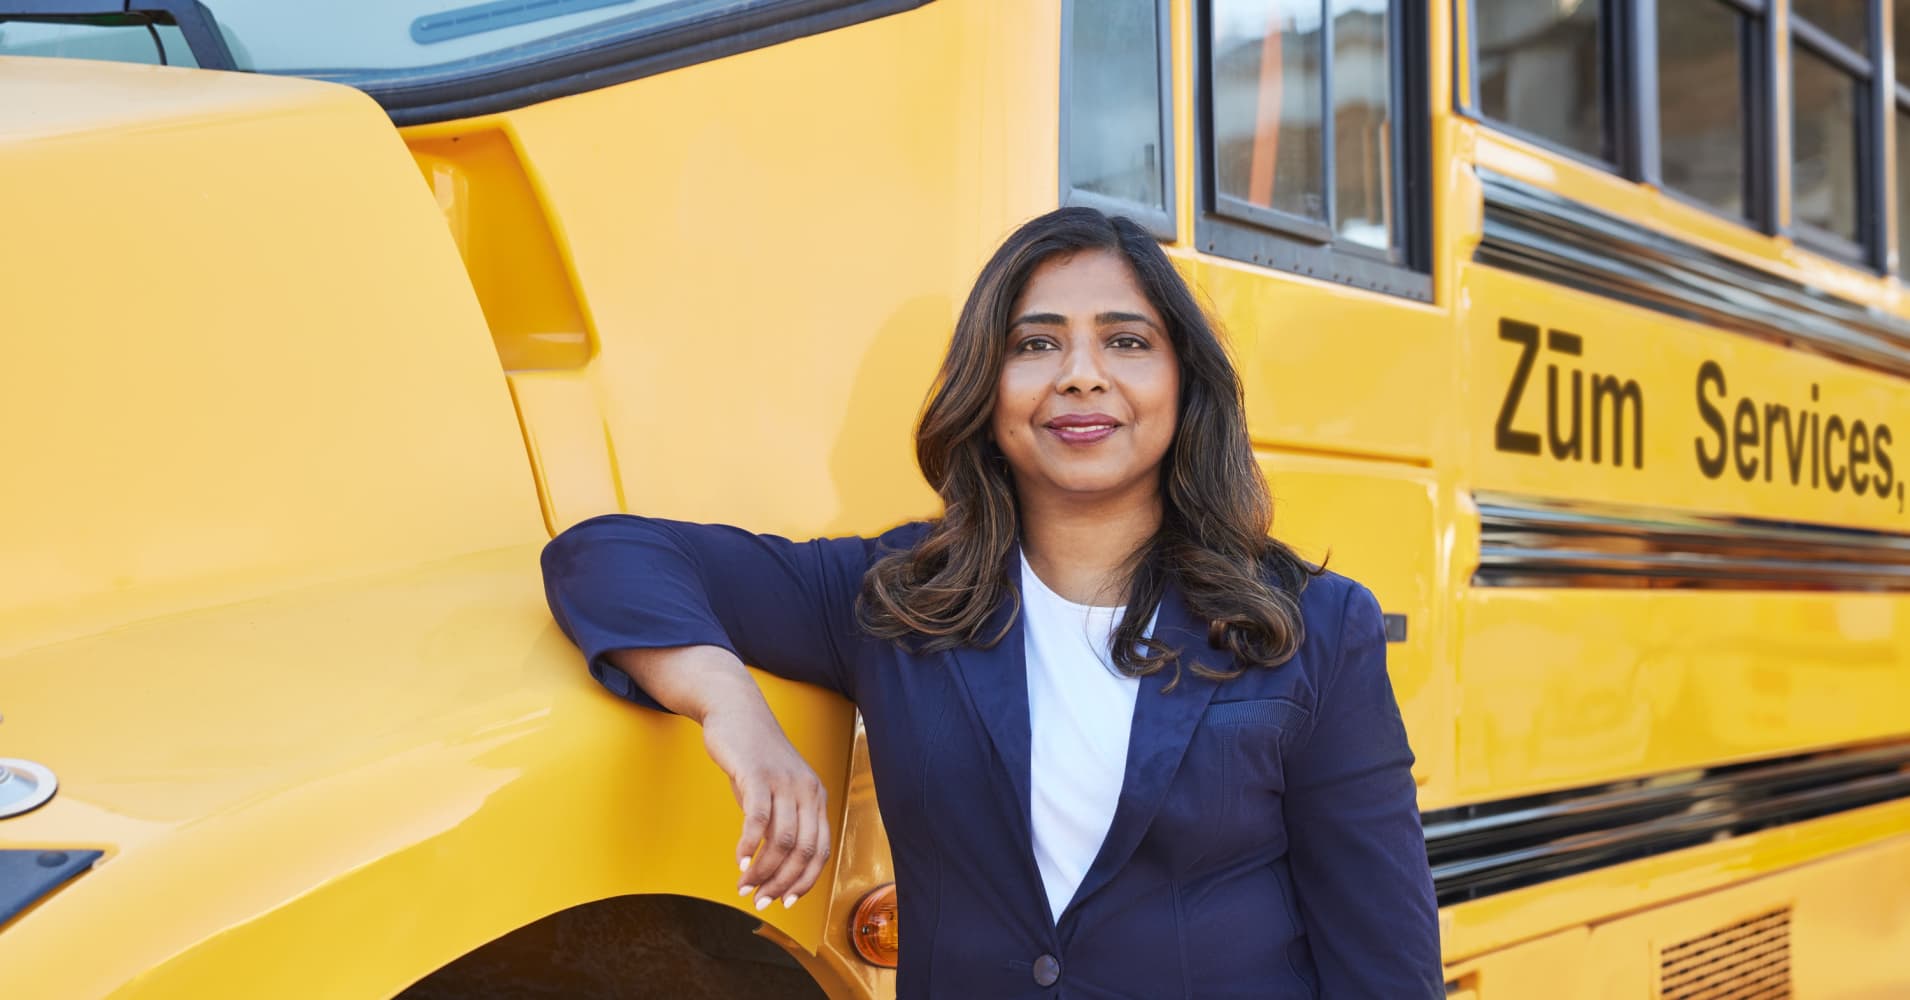 50-year-old mom built a $1.3 billion startup inspired by unreliable school buses: it was ‘an aha moment’